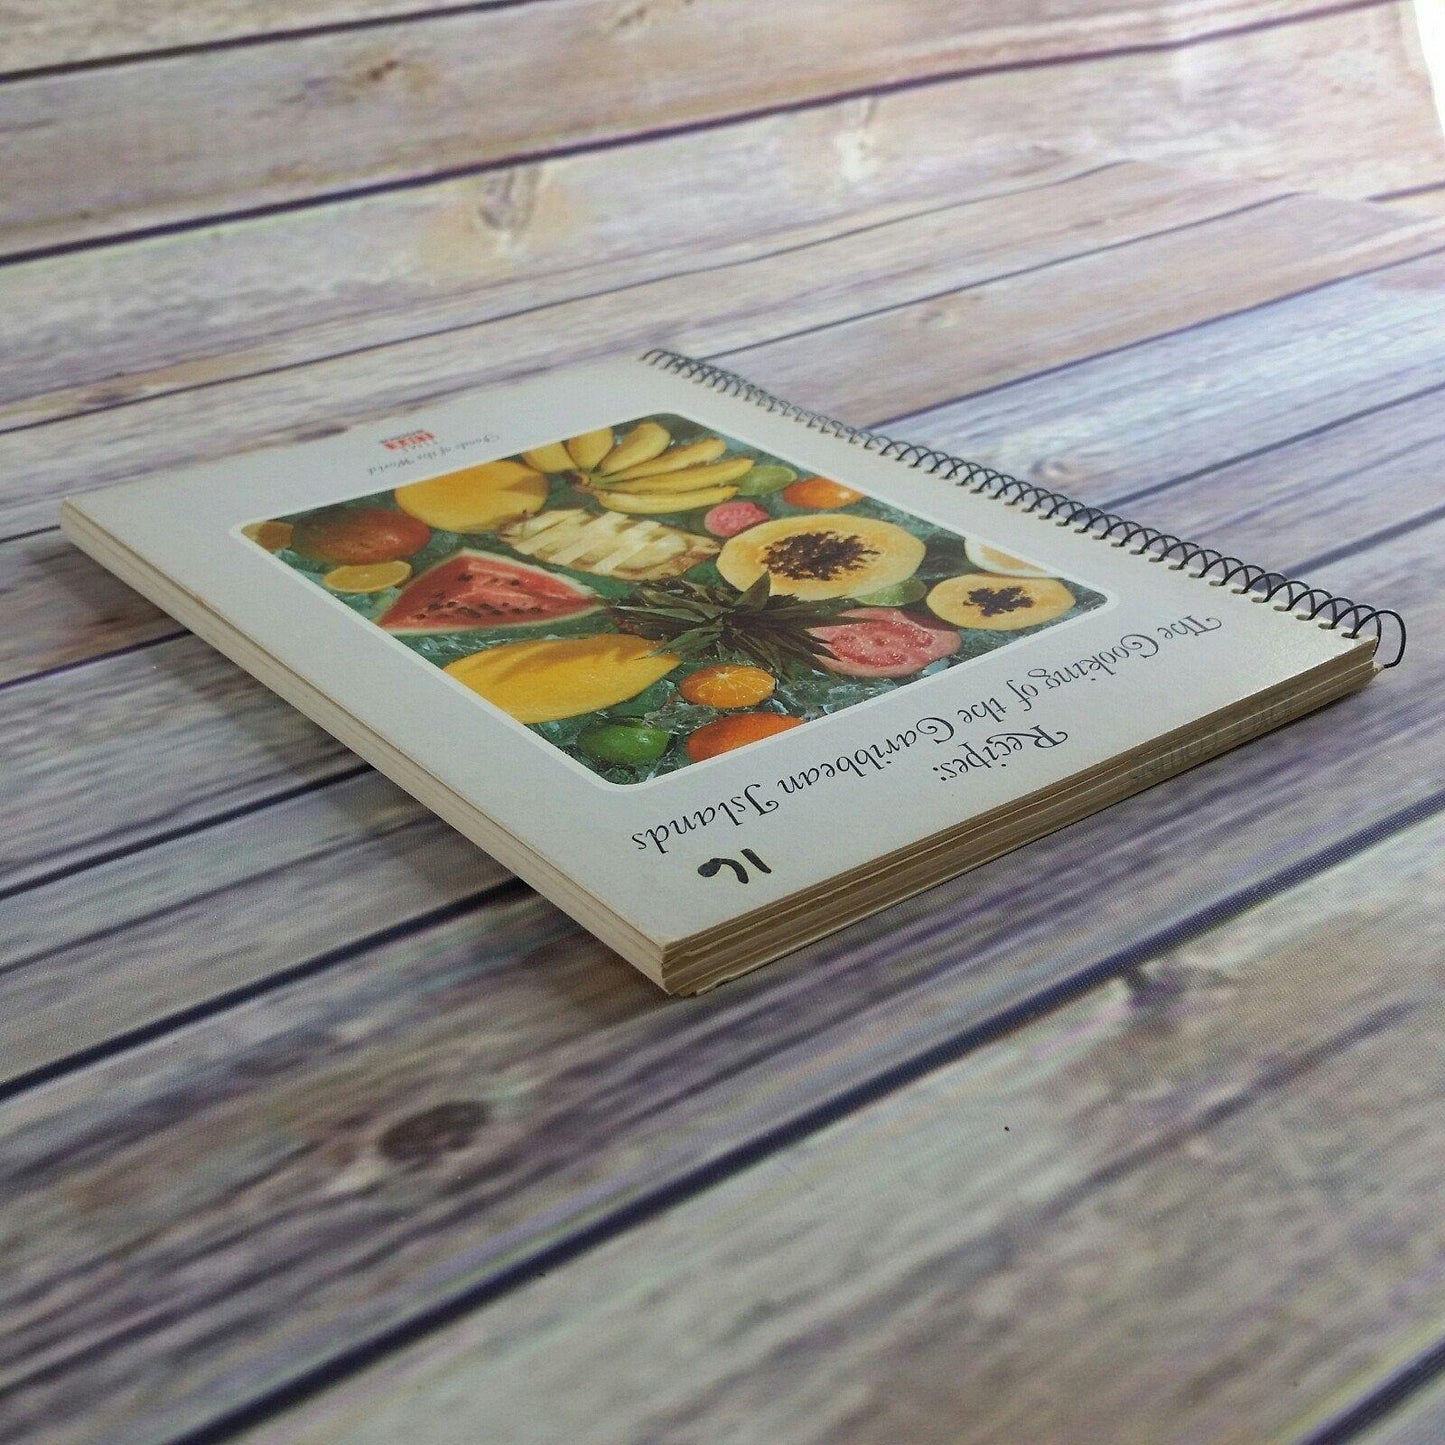 Vtg Caribbean Cookbook The Cooking of the Caribbean Islands Time Life Books Foods of the World 1970 Spiral Bound